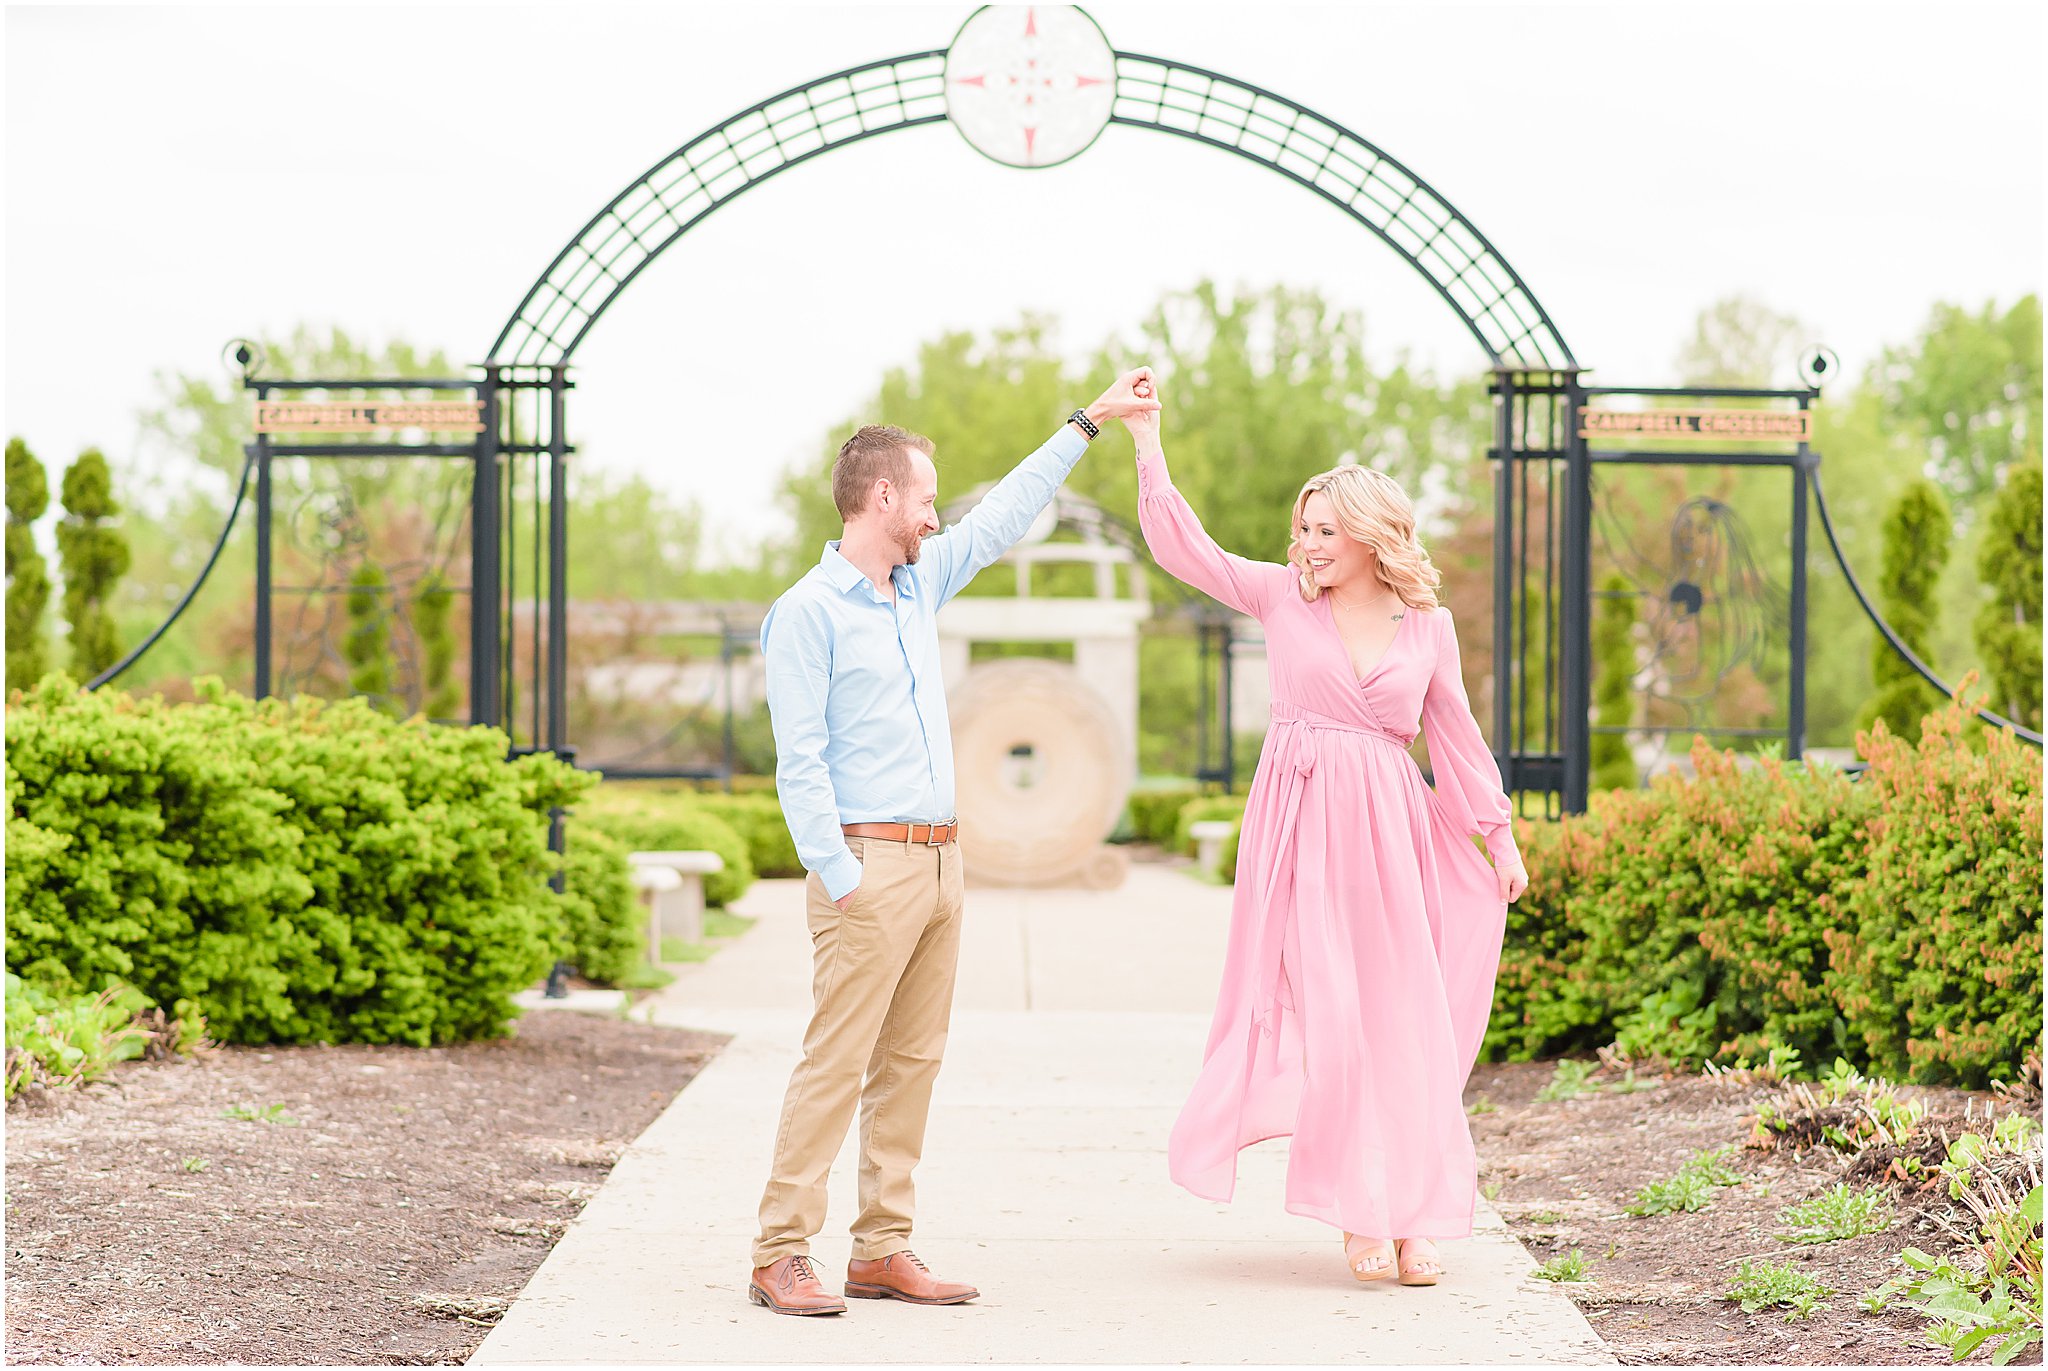 Couple twirling during Coxhall Gardens engagement session